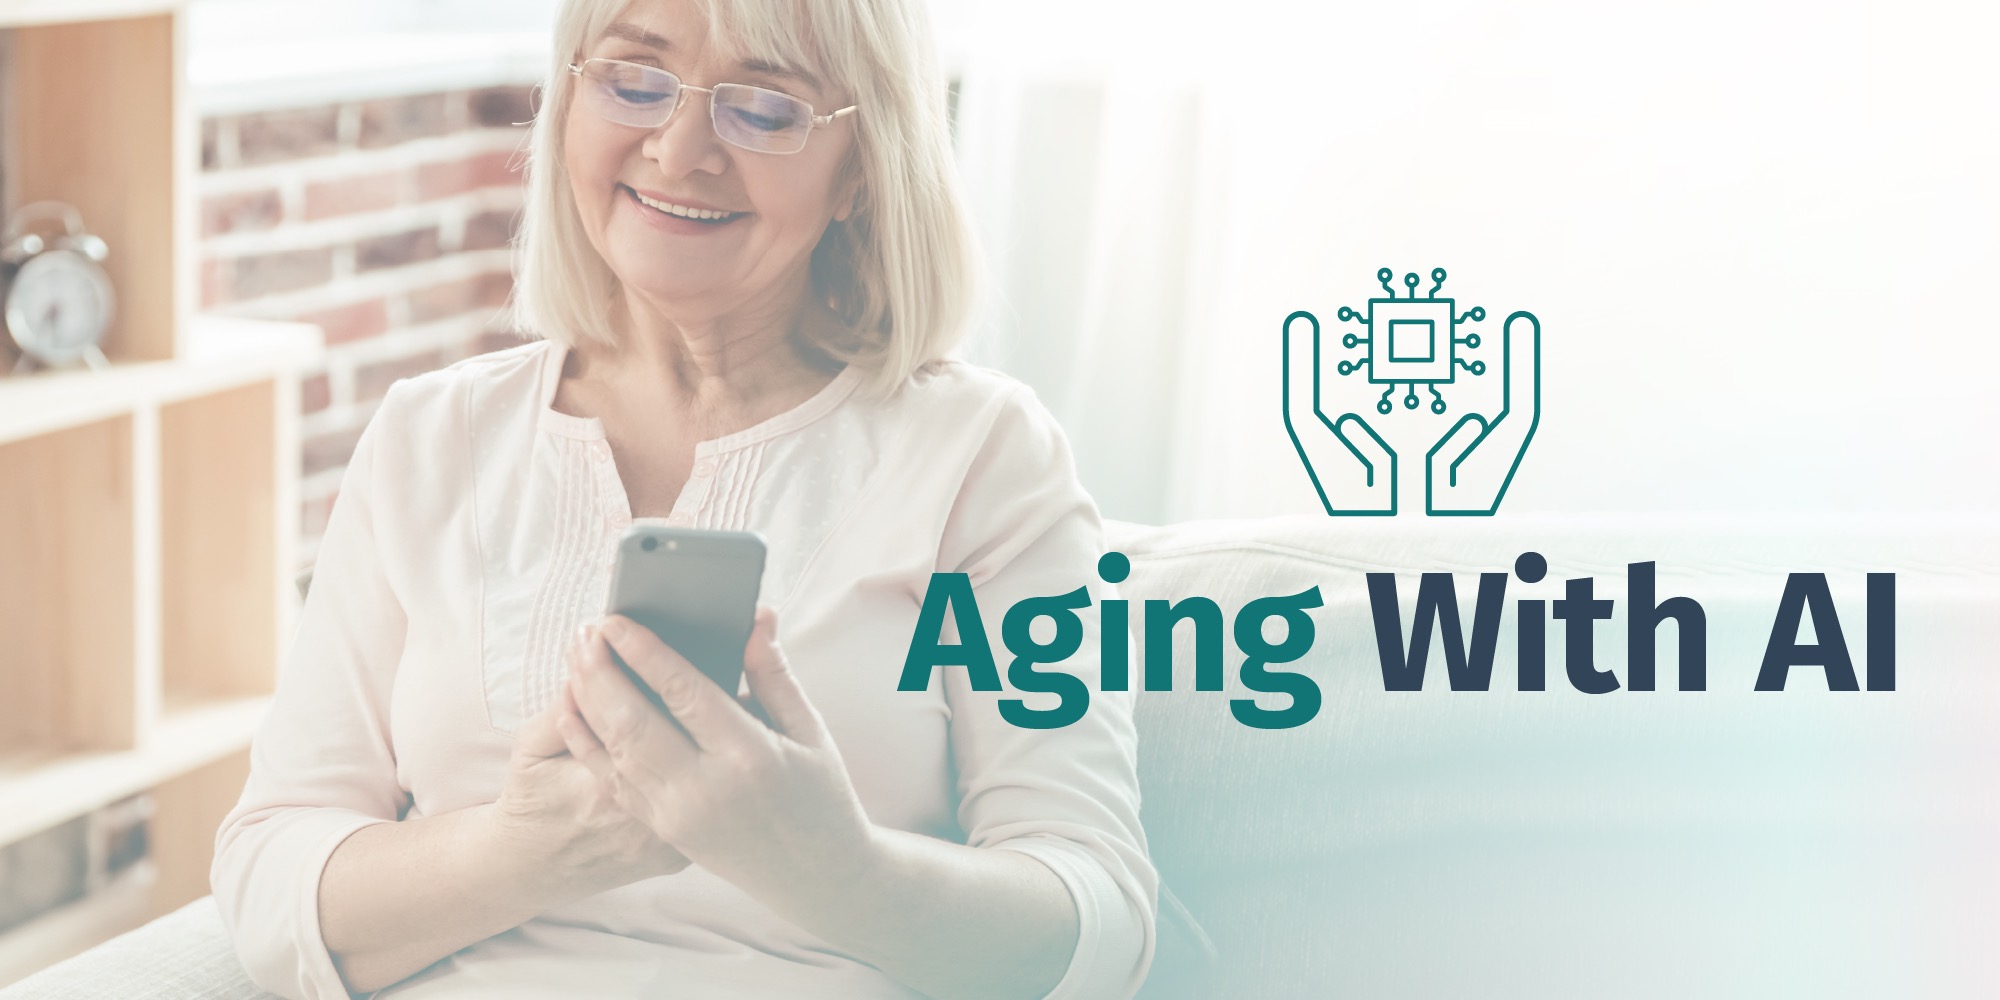 Aging with AI